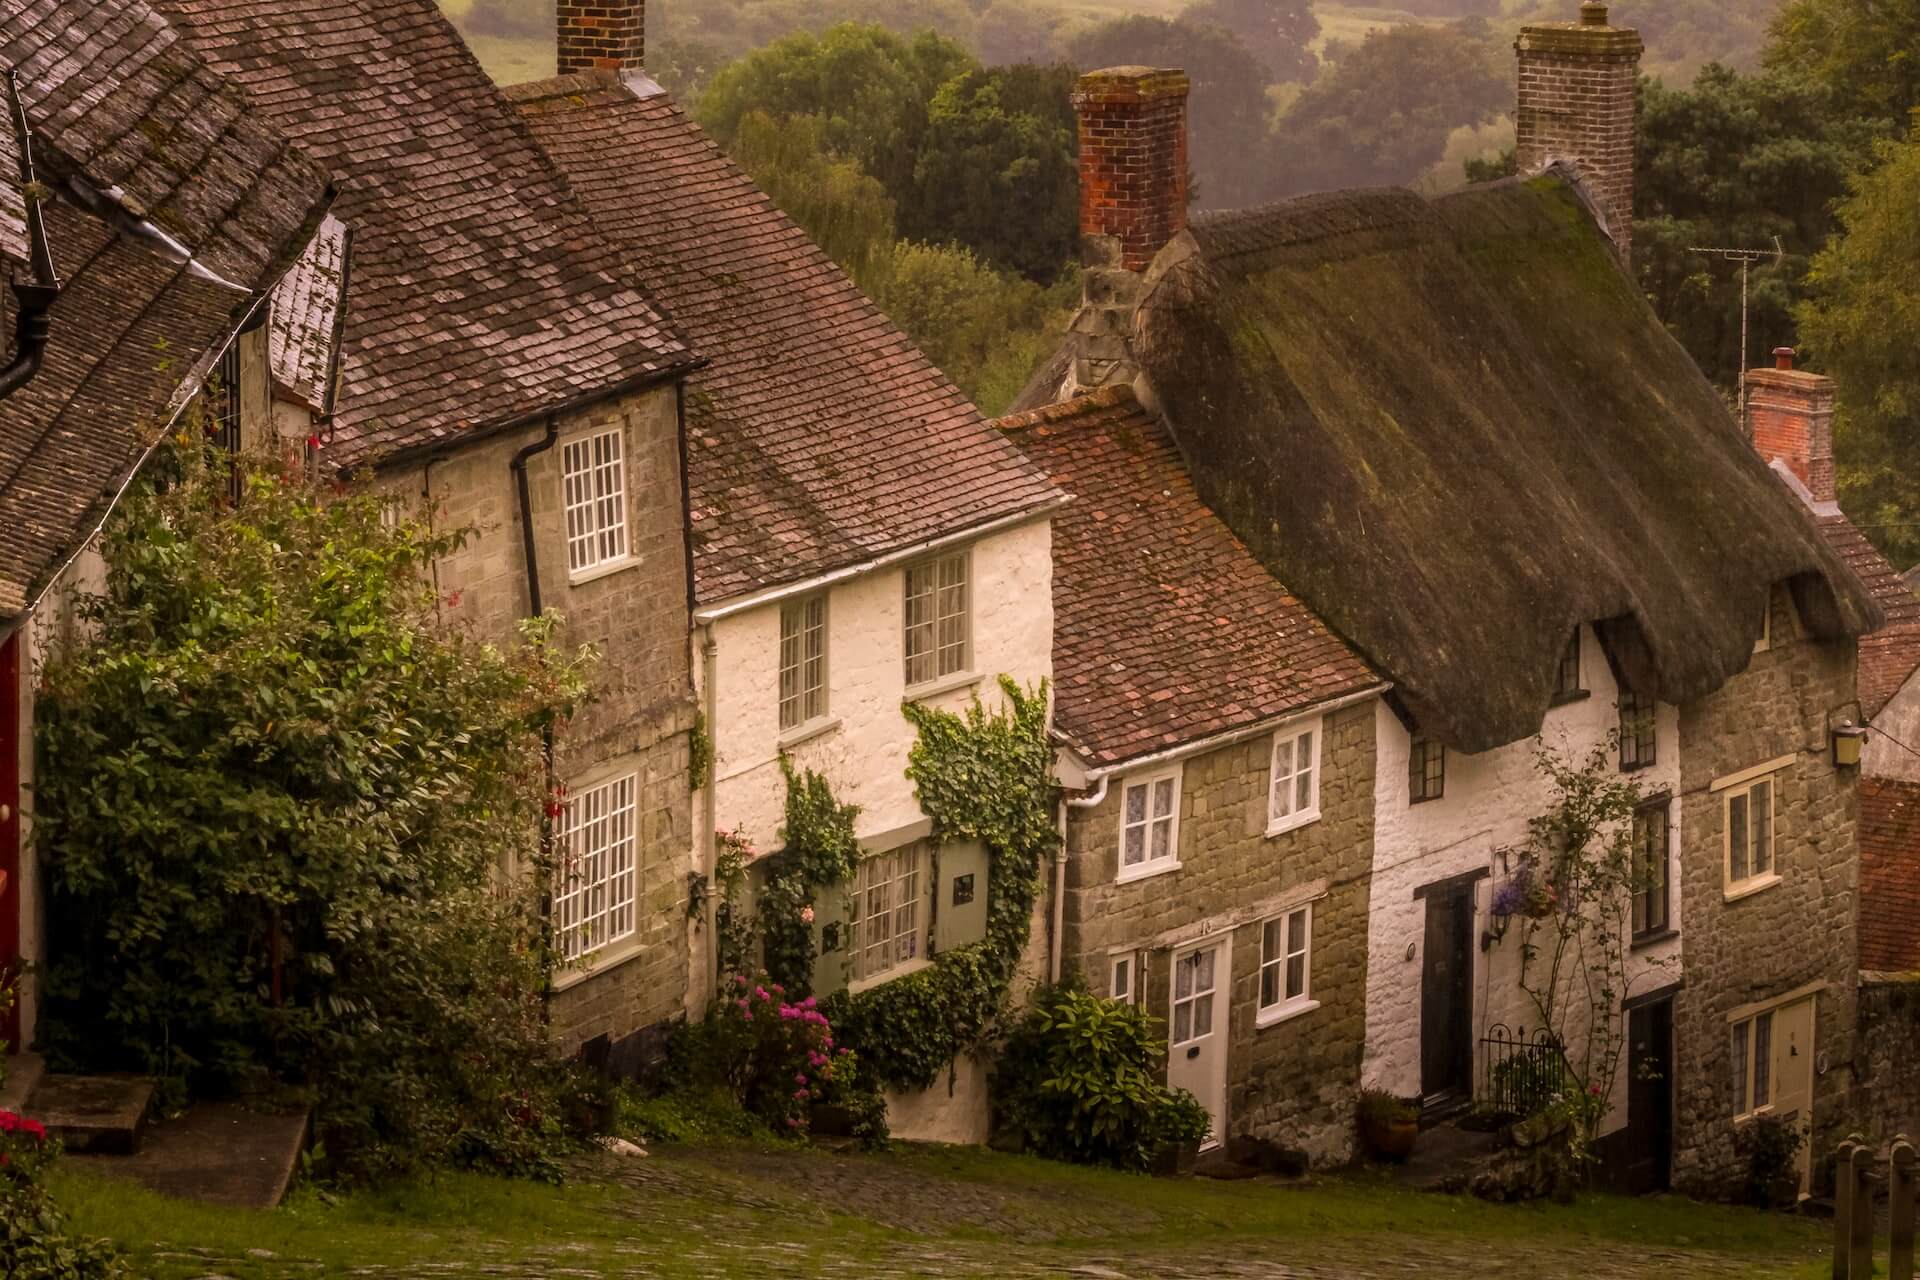 old English houses on a slope with visible roof verges